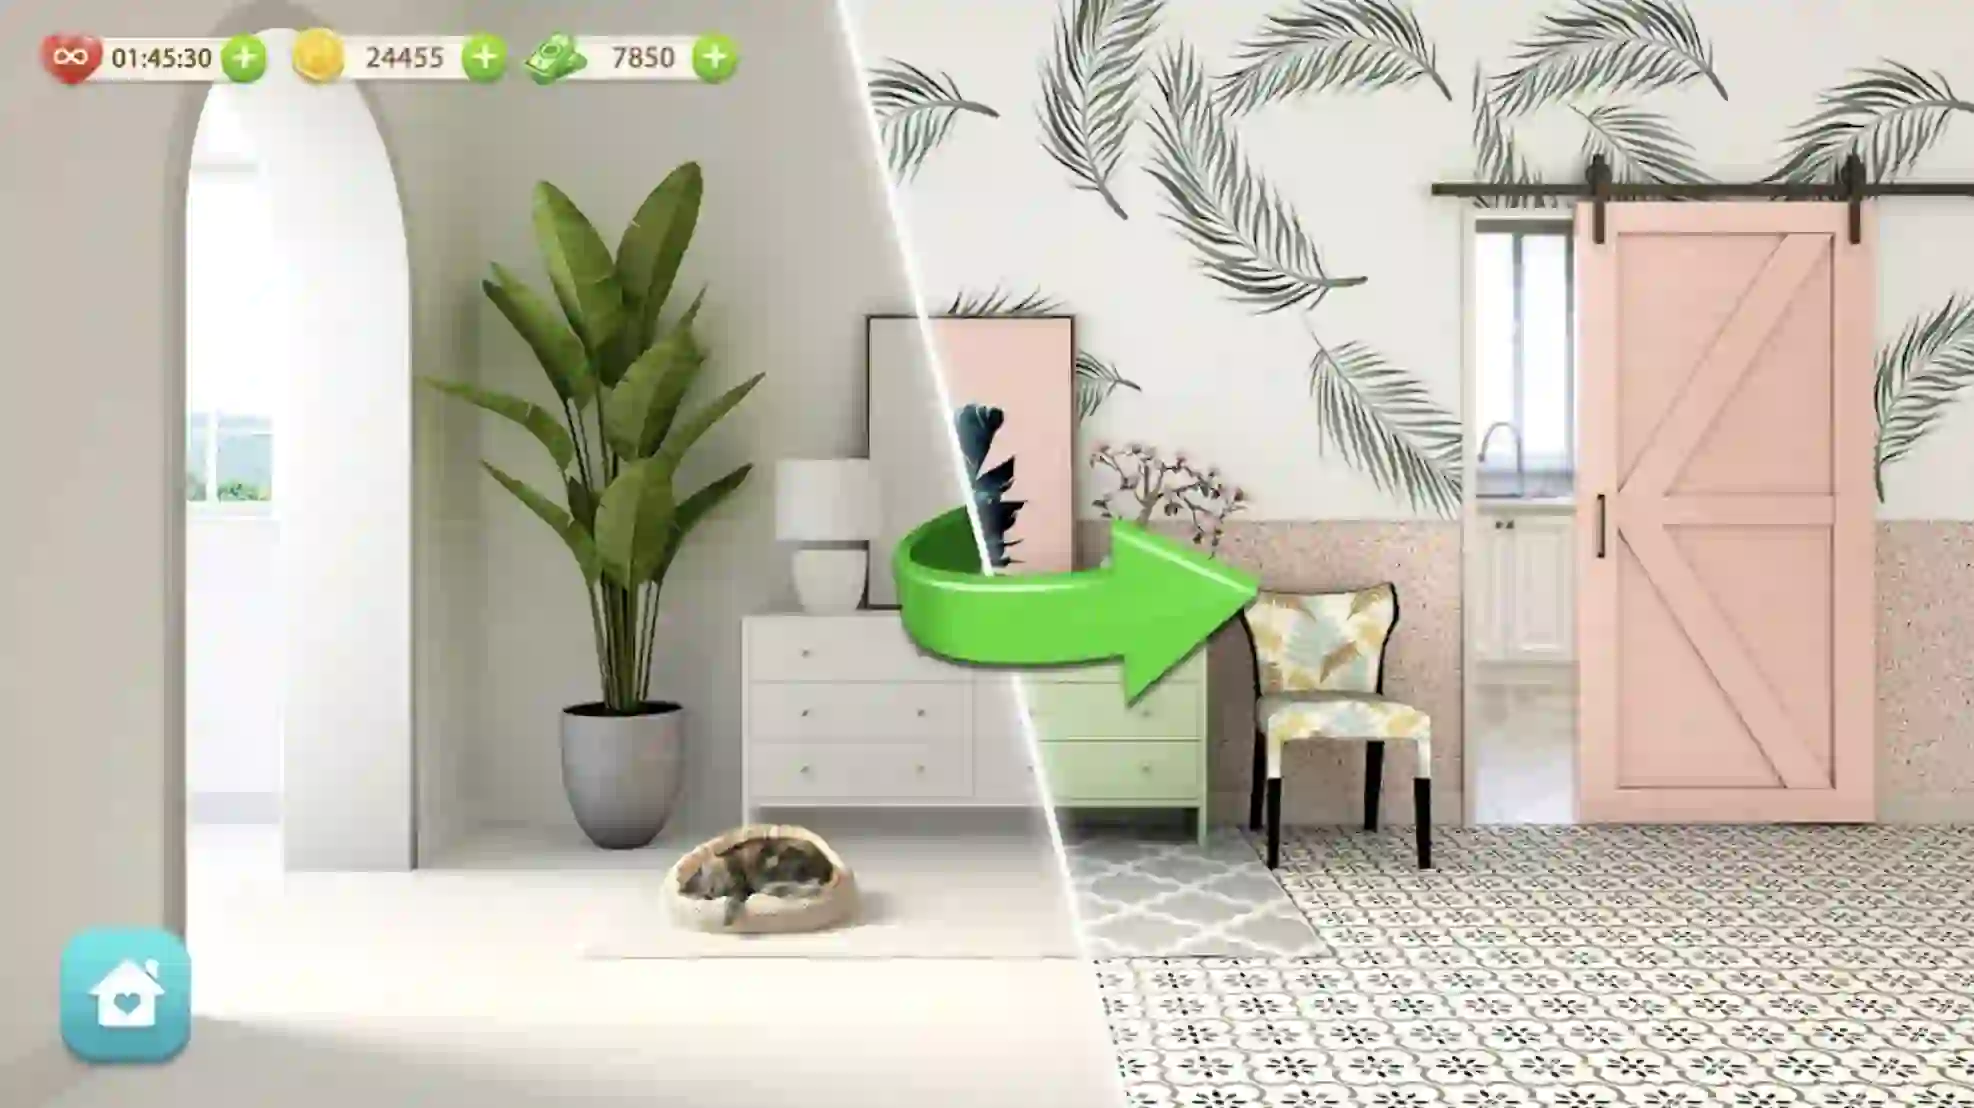 19 Best Interior Design Apps To Visualize Your Dream